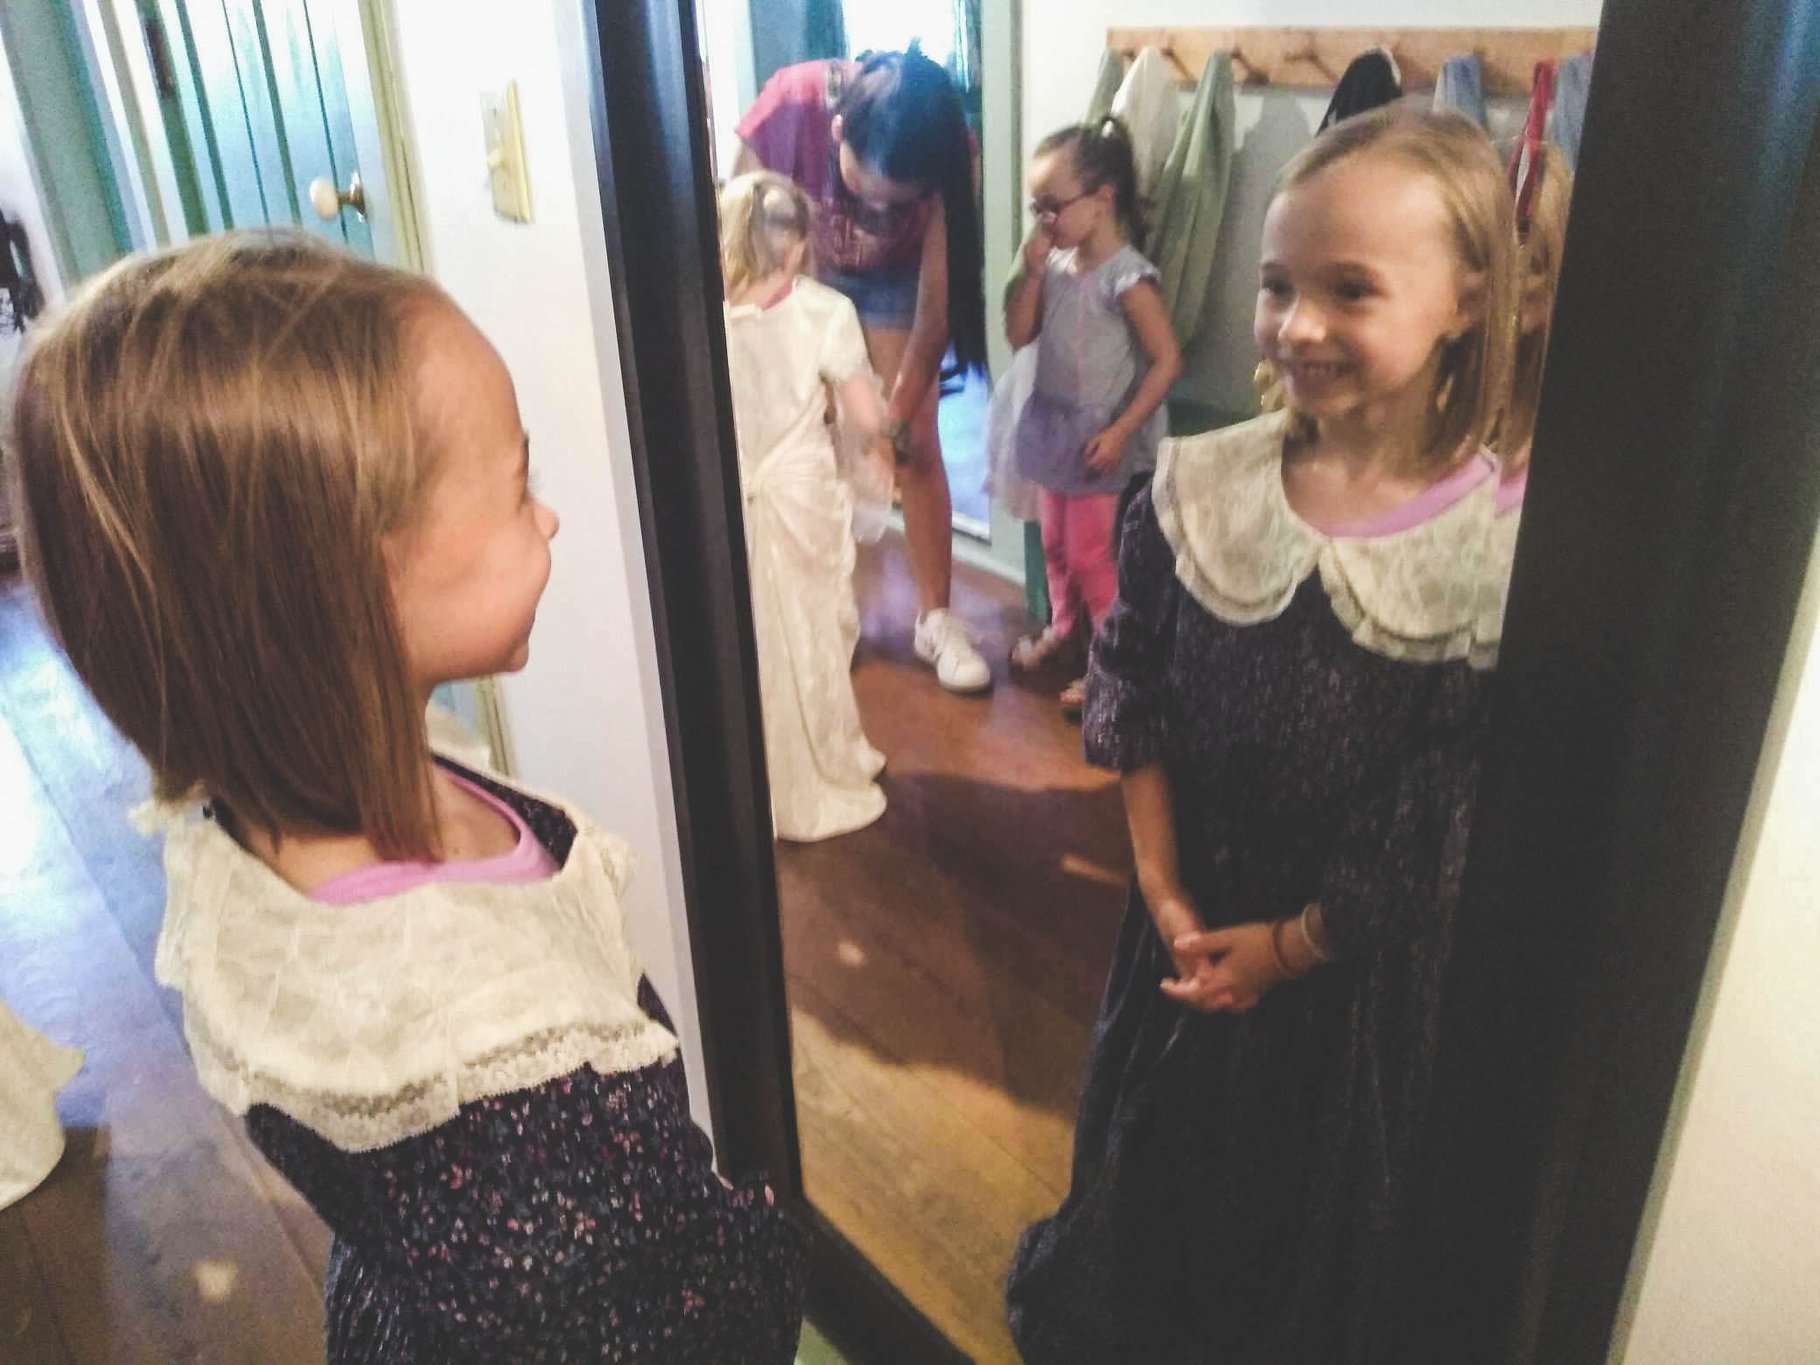 Hands-on history activities for children at the Linden House. The Linden House hosts activities for children, homeschool groups, and school groups throughout the year. 